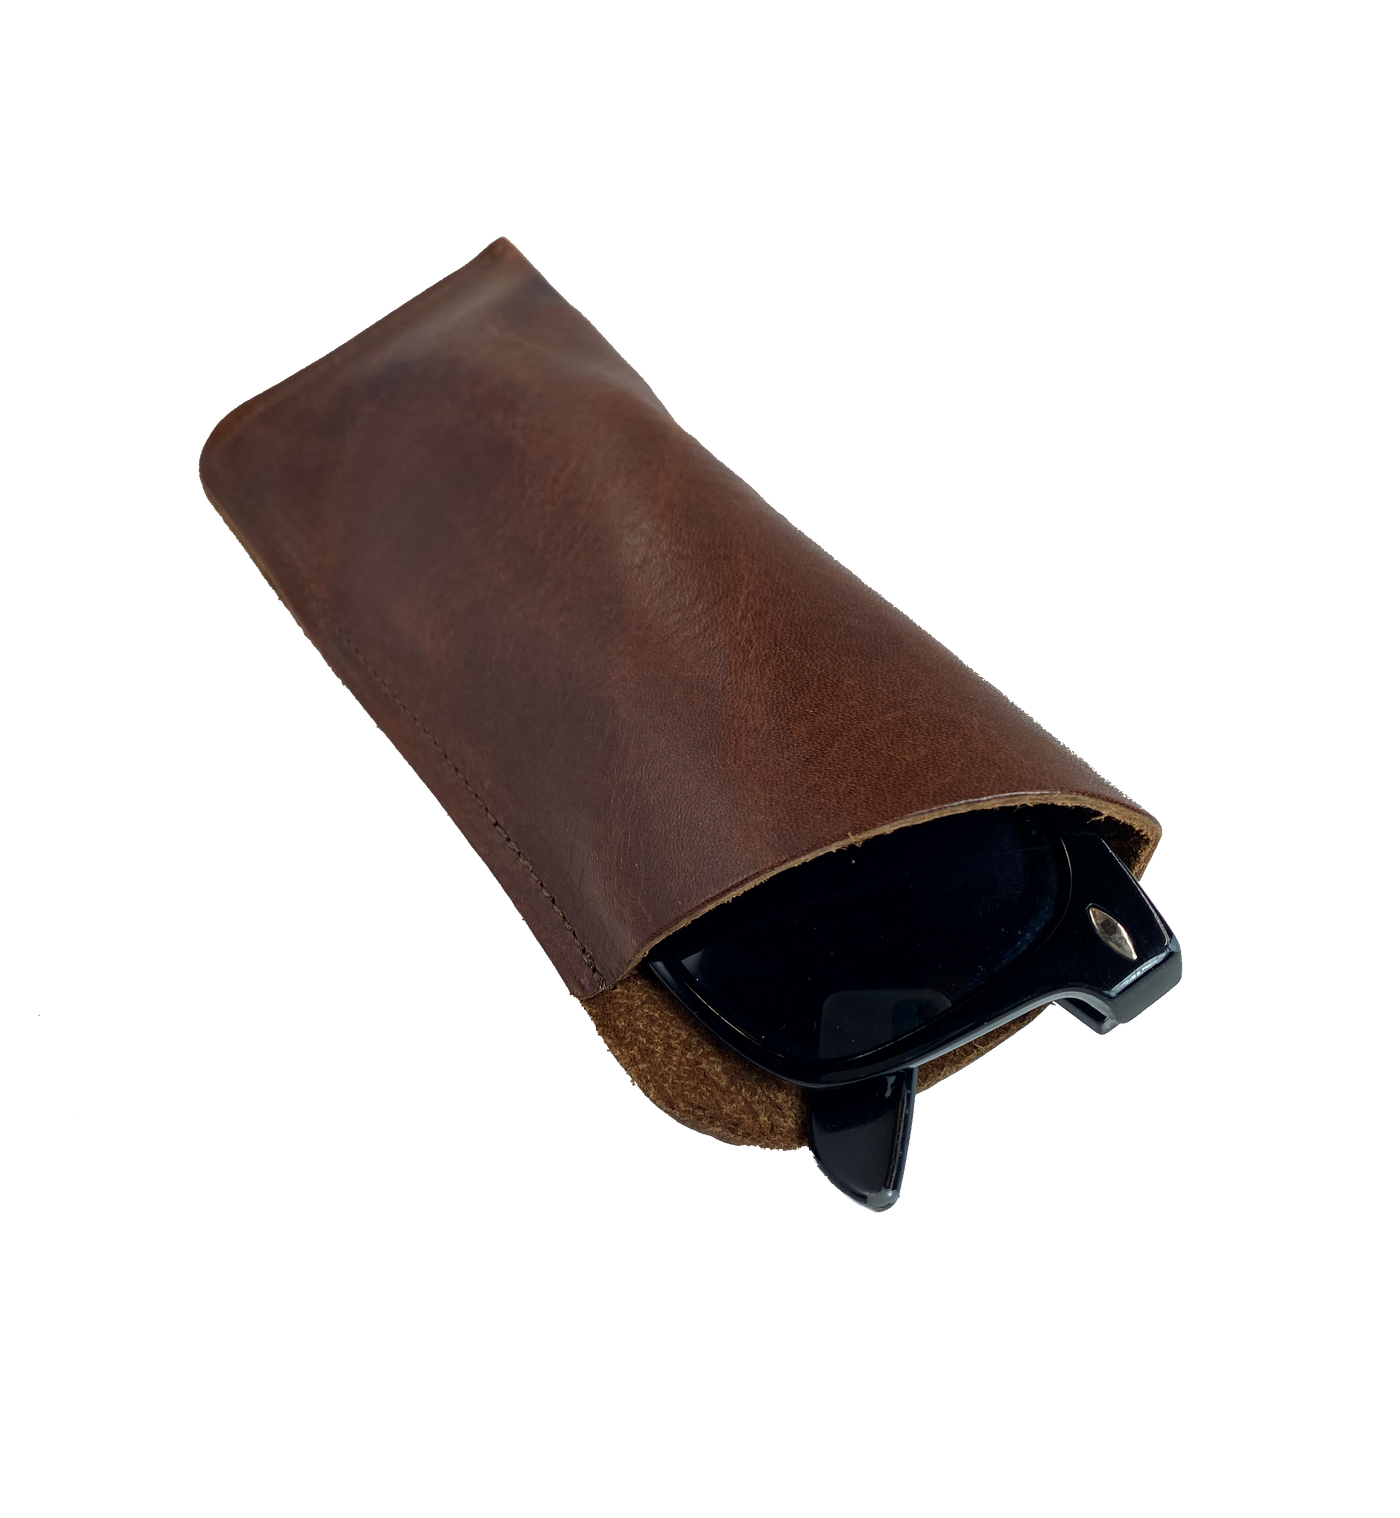 Made in USA Soft Leather eyeglass cover. Available in Black or Assorted Brown. BUY MORE and SAVE!